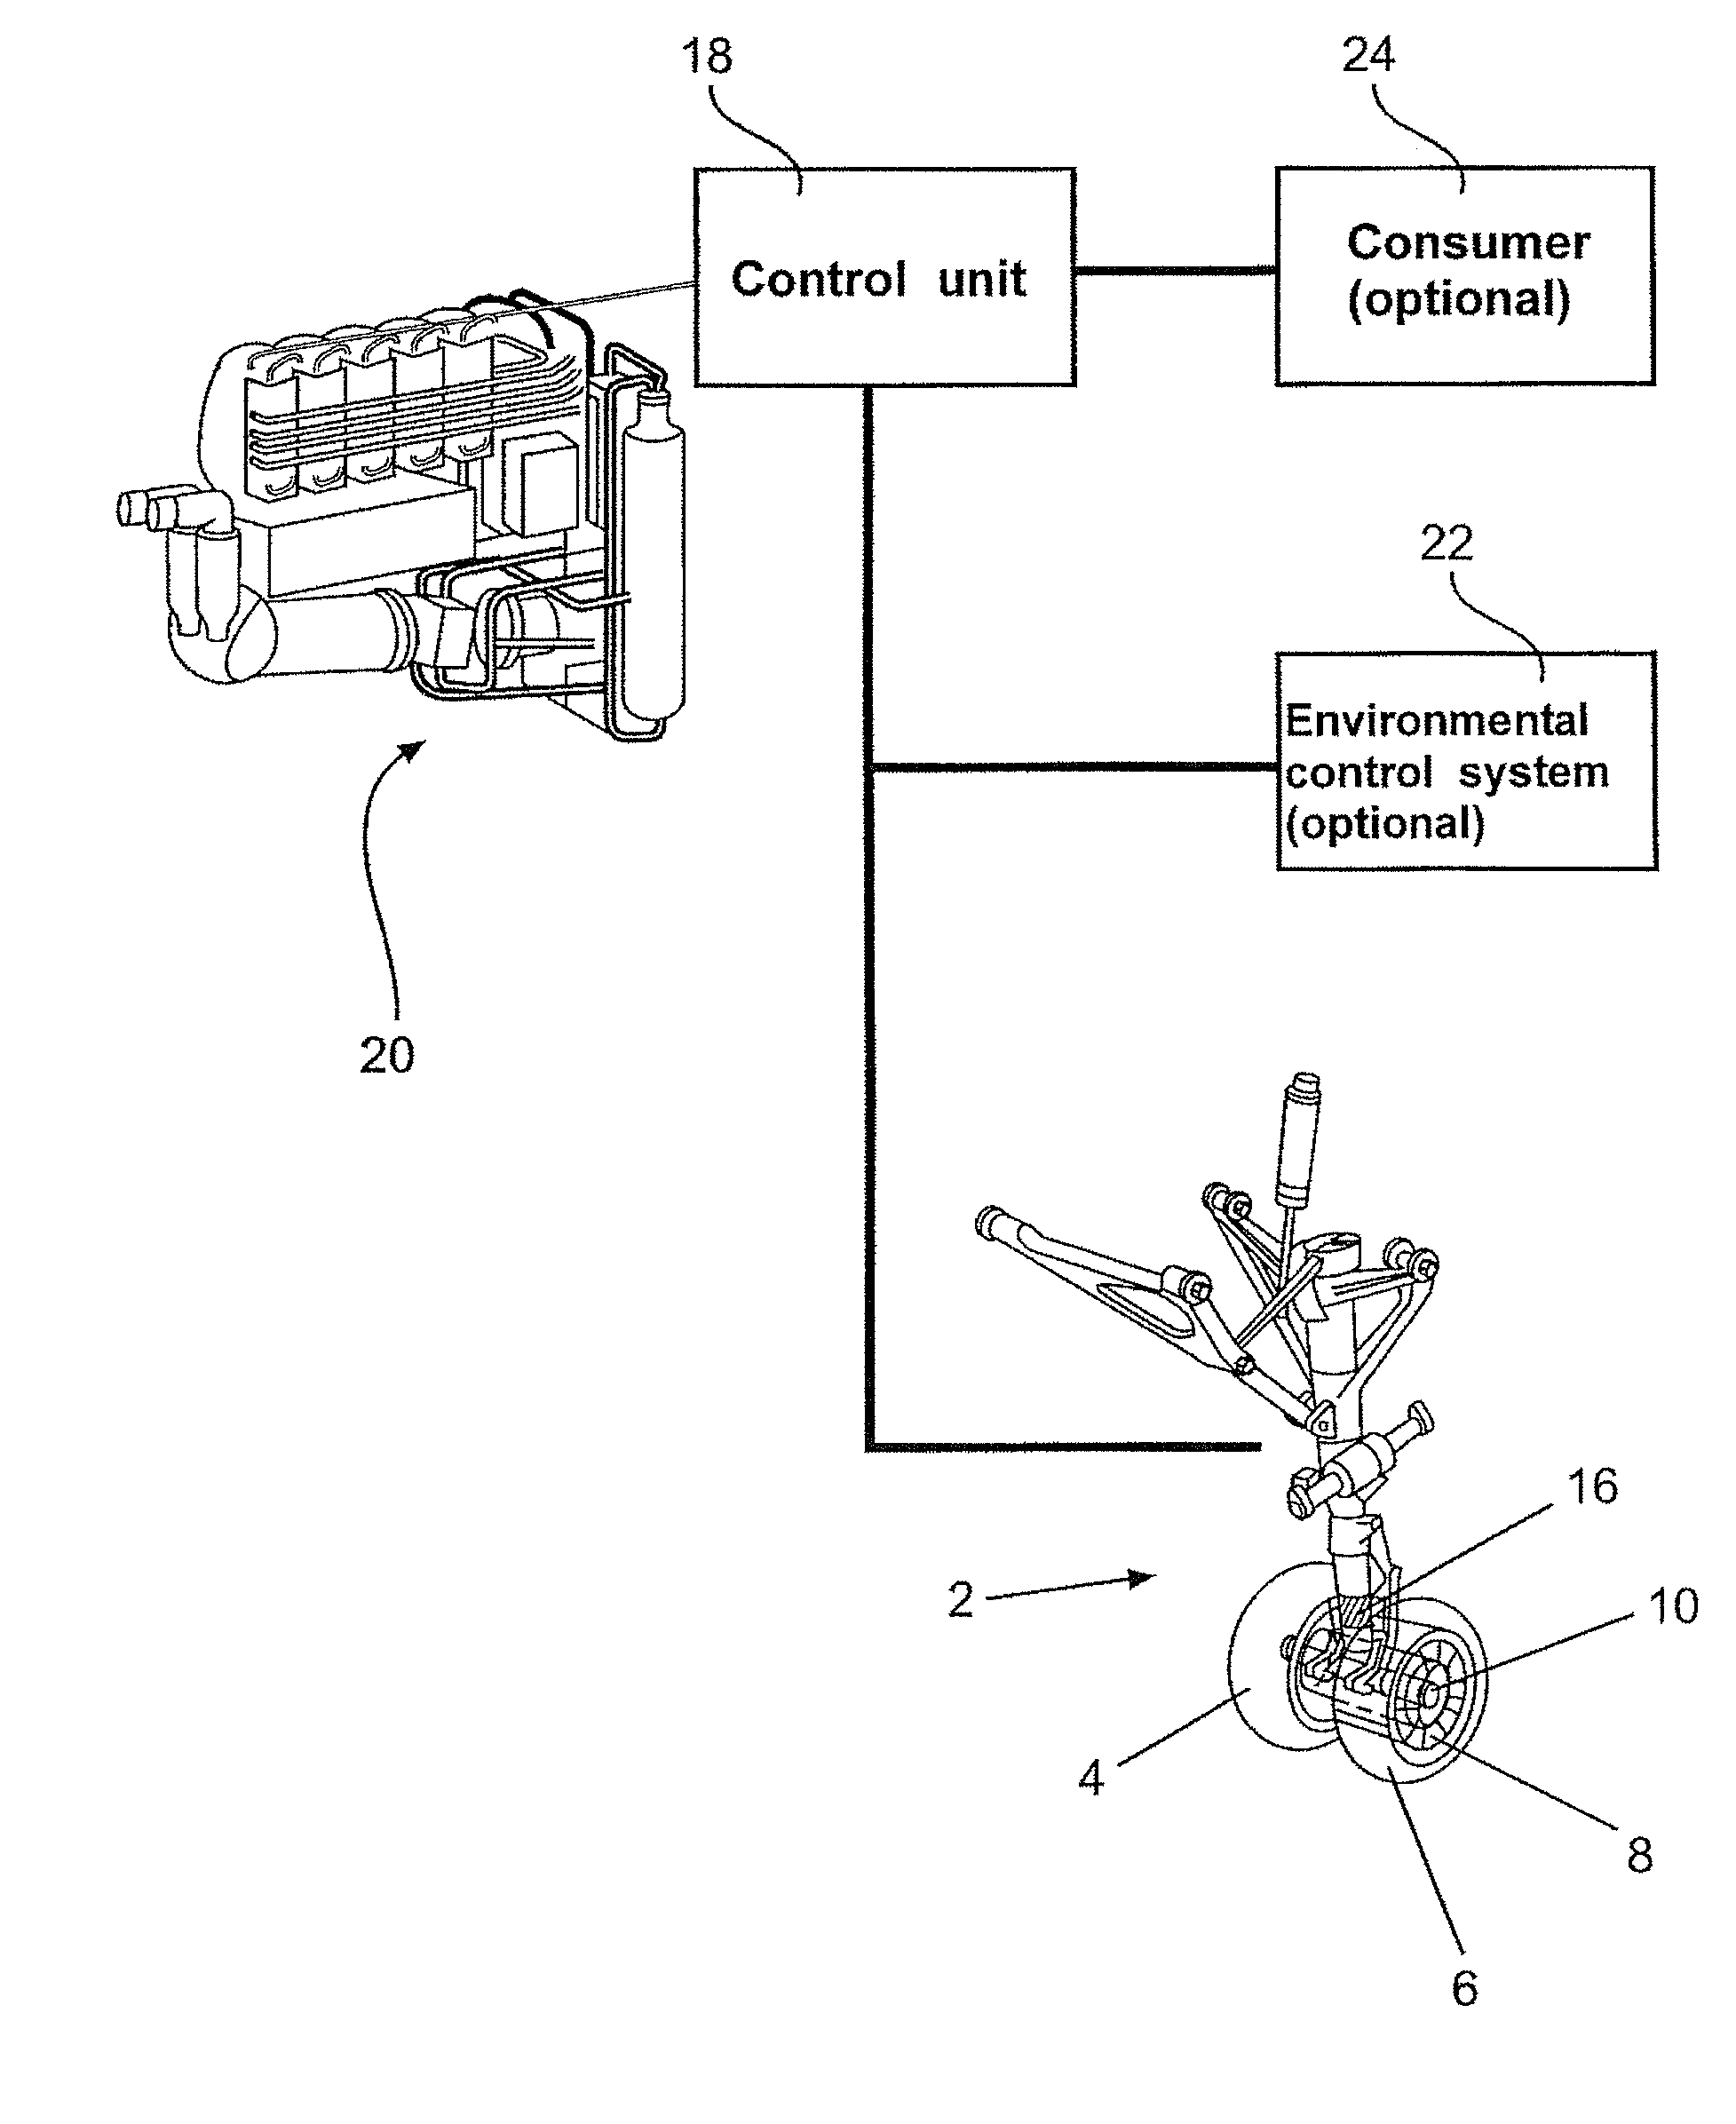 Wheel drive system for aircraft with a fuel cell as energy source